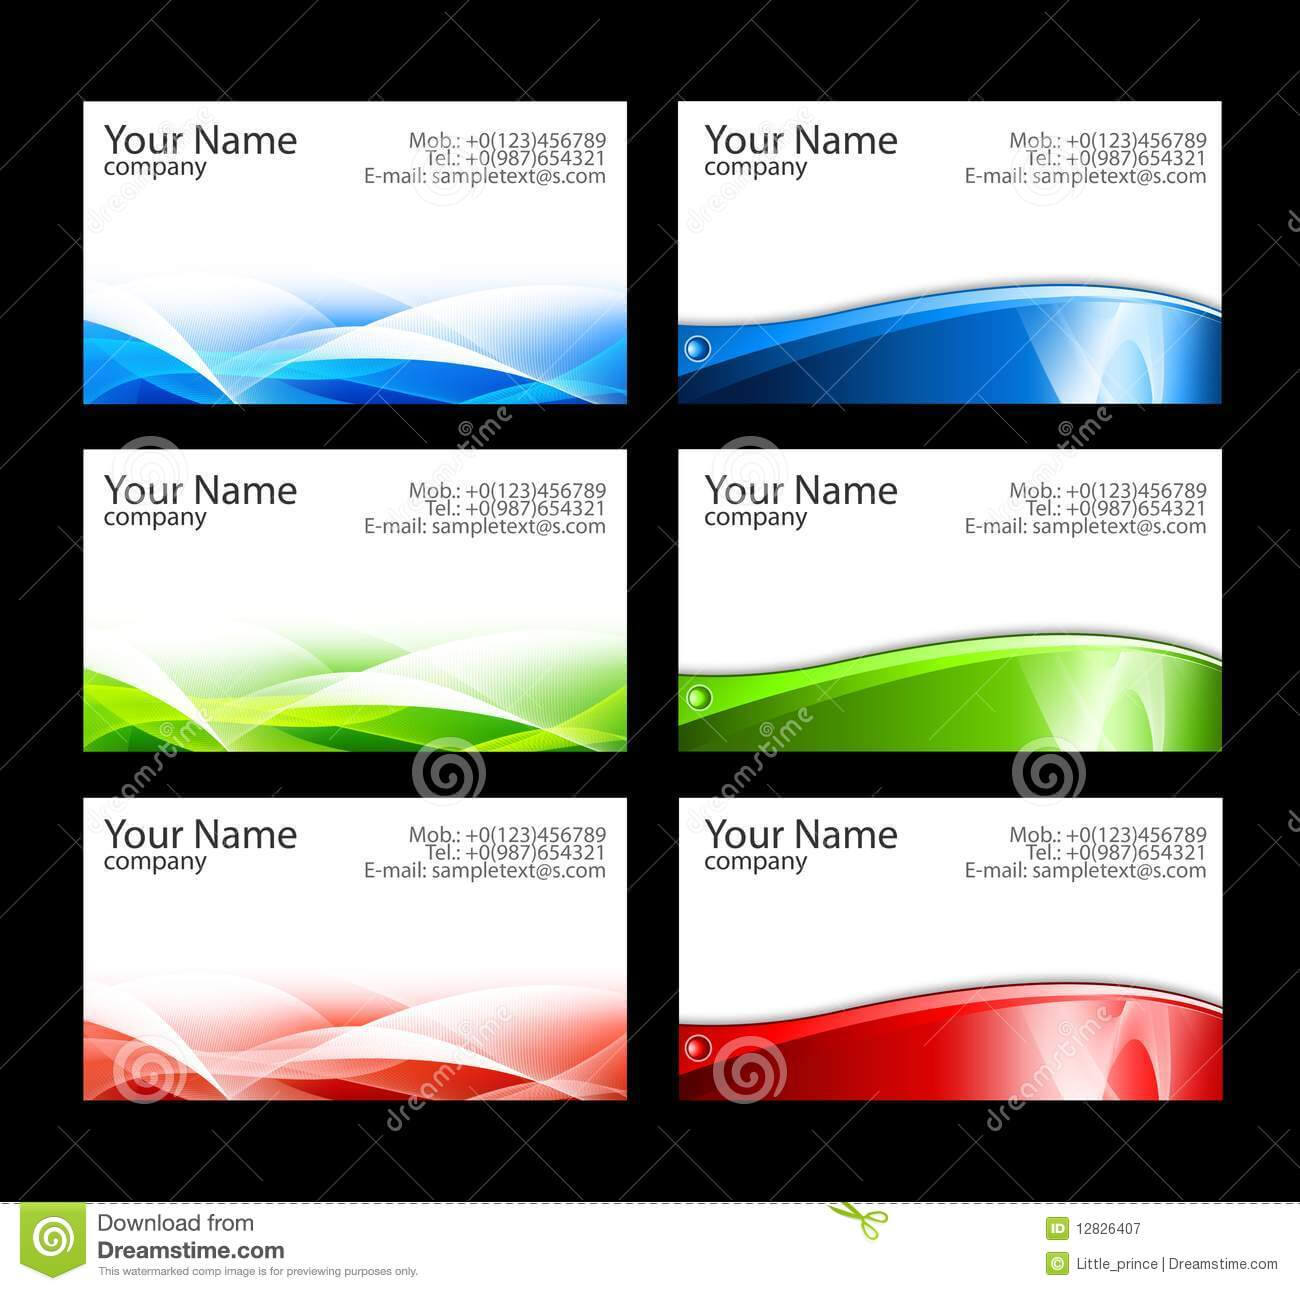 Business Cards Templates Stock Illustration. Illustration Of Regarding Microsoft Templates For Business Cards